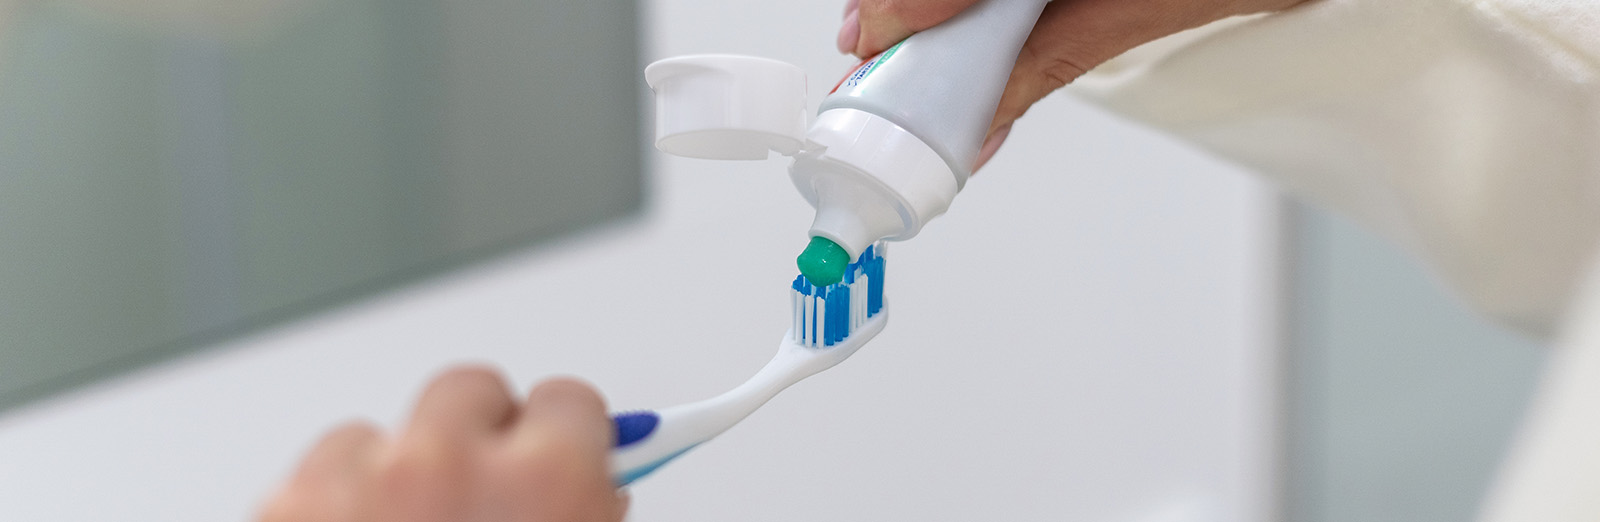 What should you look for in toothpaste, floss and mouthwash - hero image.jpg